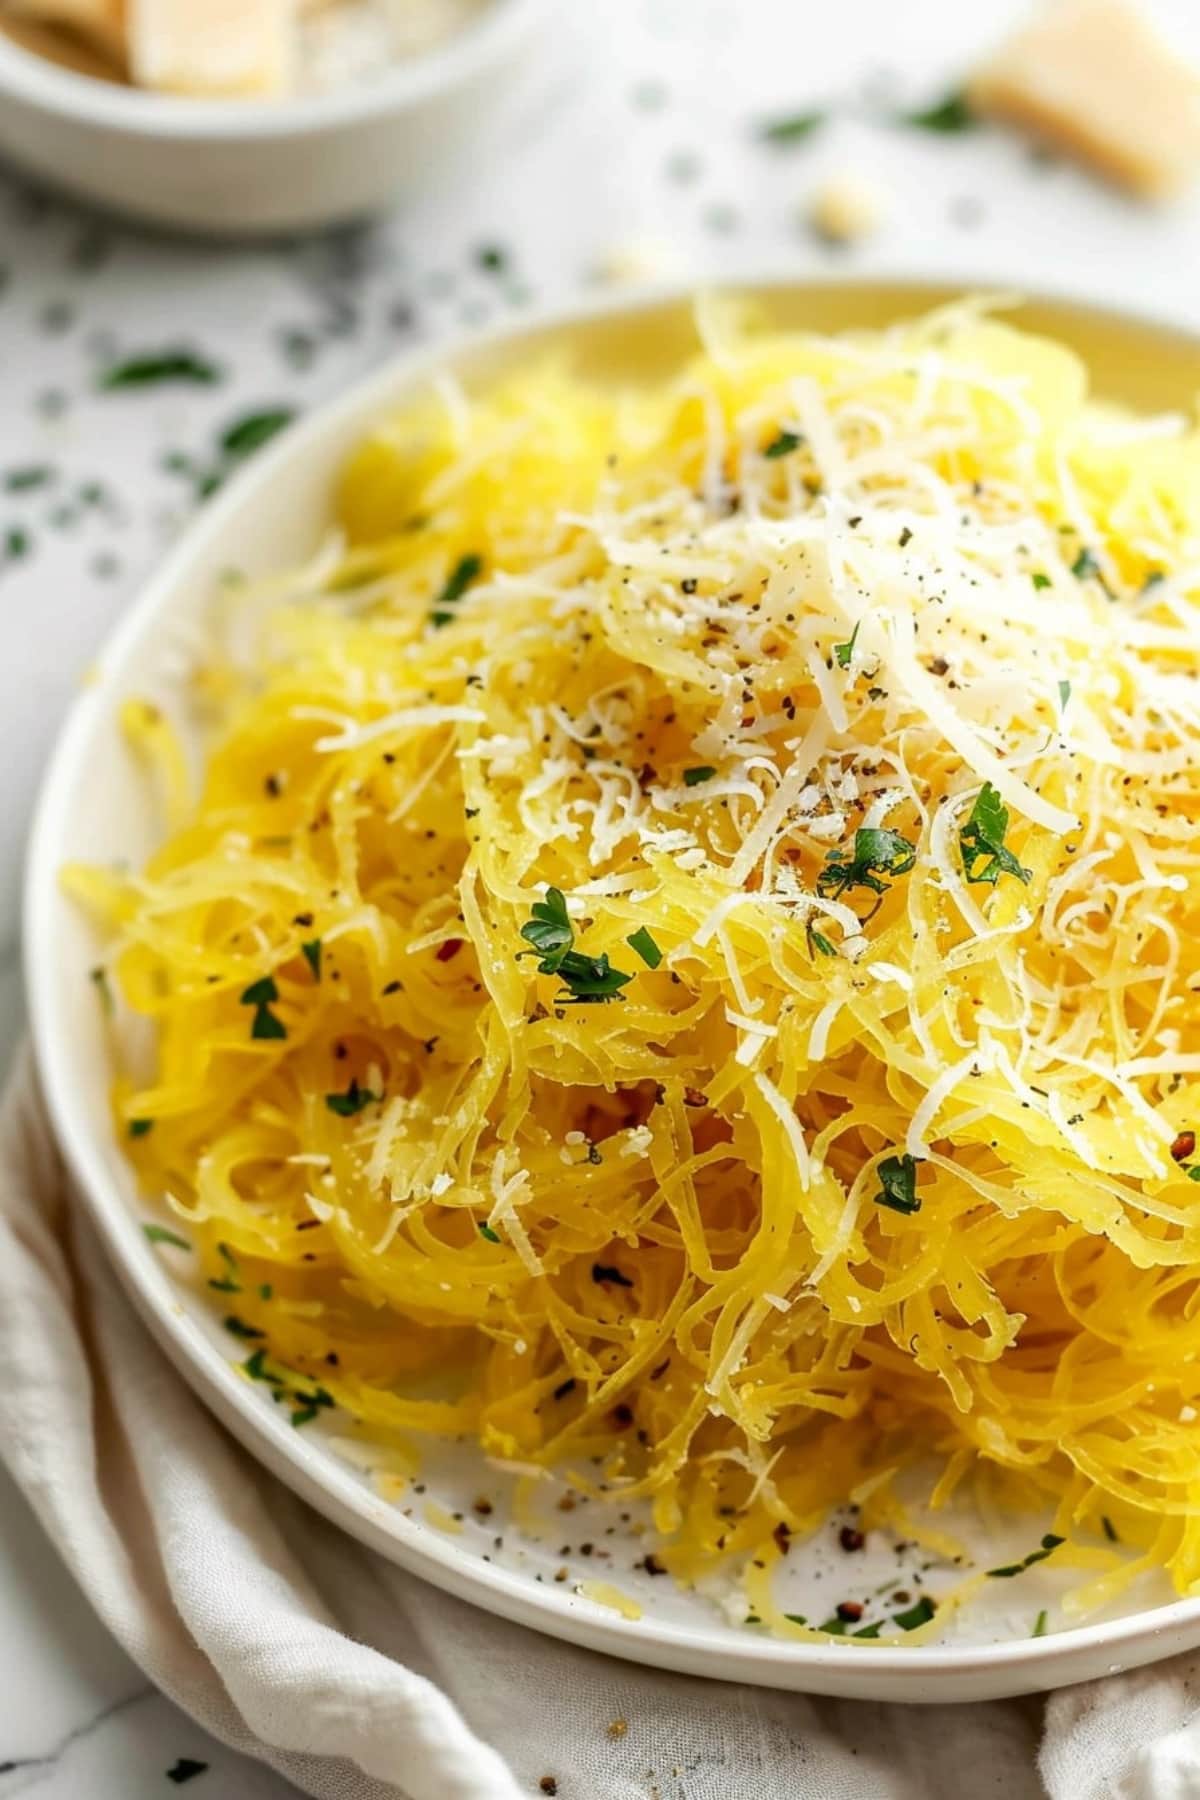 Spaghetti squash with parmesan cheese and seasoning on a white plate.